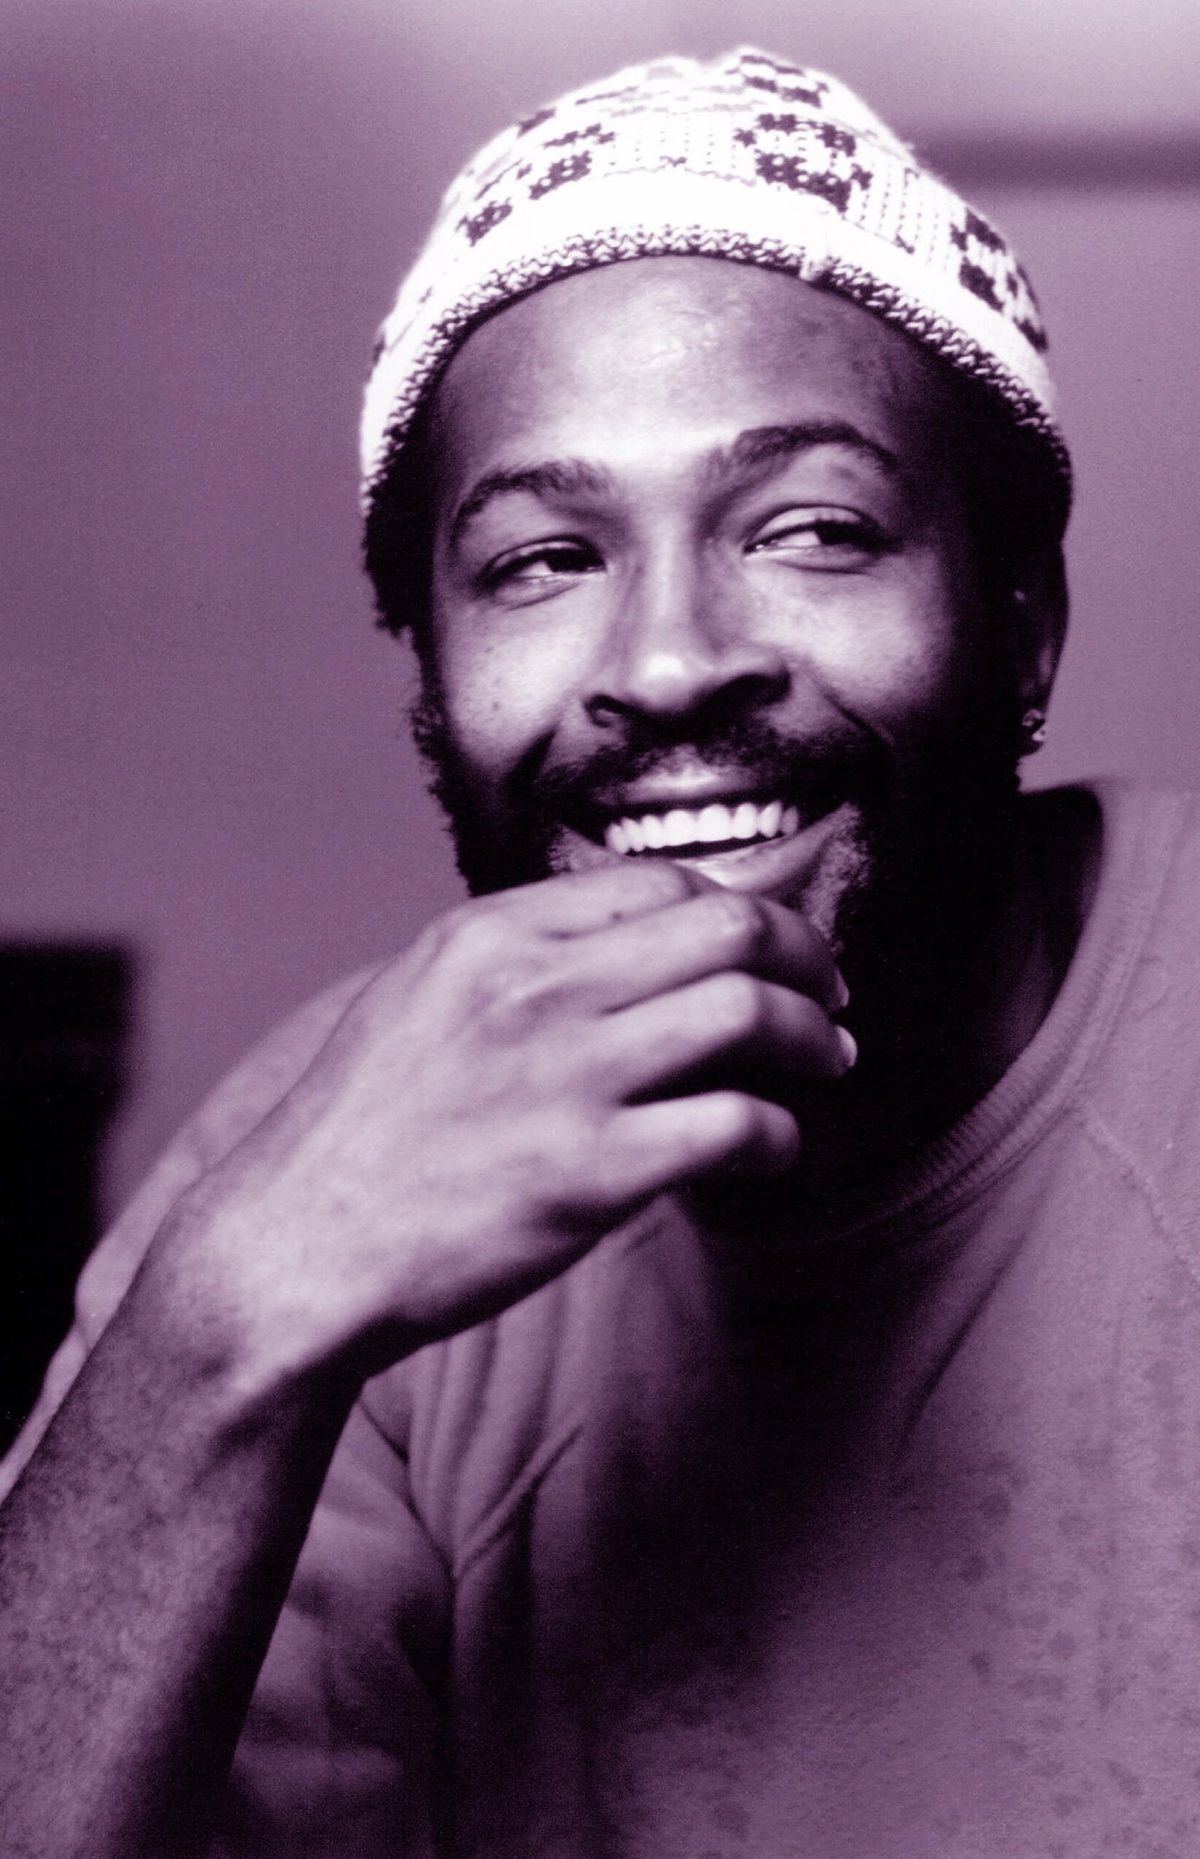 “What’s Going On,” with the silky,&nbsp;layered vocals and an emphatic protest message&nbsp;was topical&nbsp;when Marvin Gaye cut it in&nbsp;1970.&nbsp;And&nbsp;it resonates&nbsp;in 2021, in the wake of George Floyd’s death&nbsp;by&nbsp;police.&nbsp;